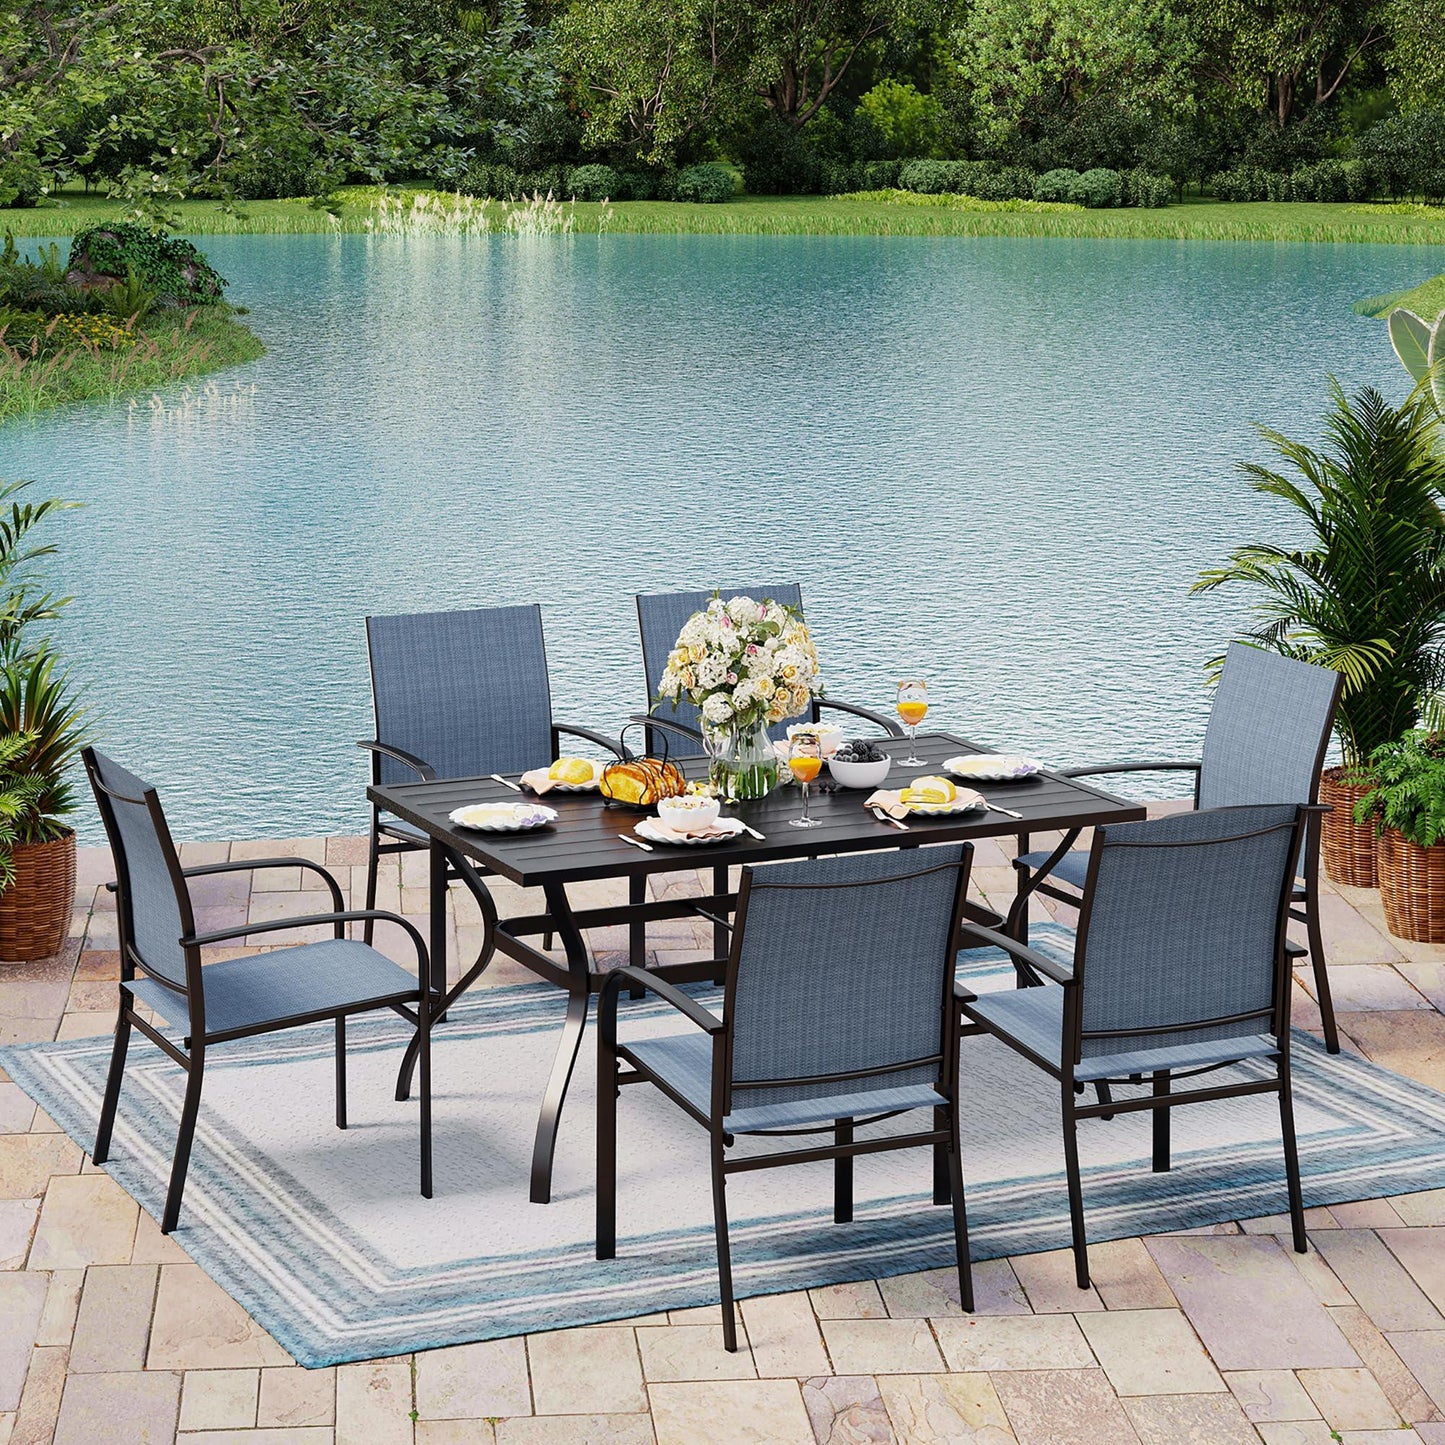 MIXPATIO Outdoor Patio Dining Set 7 Piece Furniture Set with 6 Blue Textilene Chairs and Metal Rectangular Table for Deck Garden Backyard Lawn Poolside - CookCave